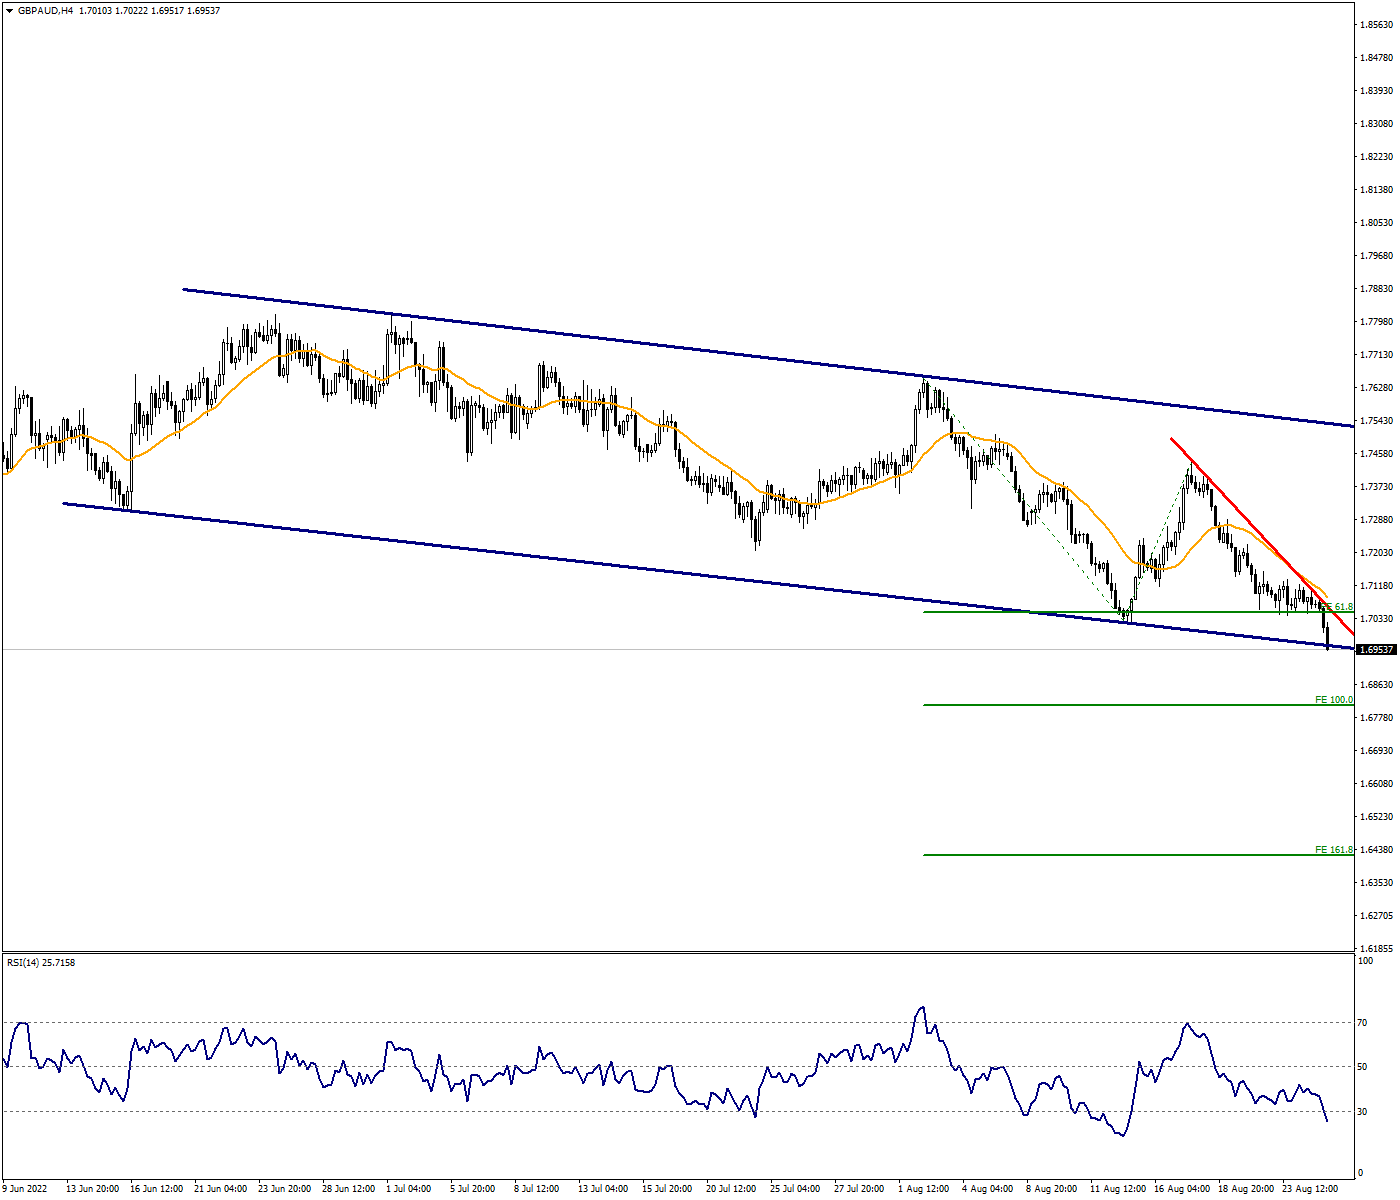 GBPAUD at 5-Year Low